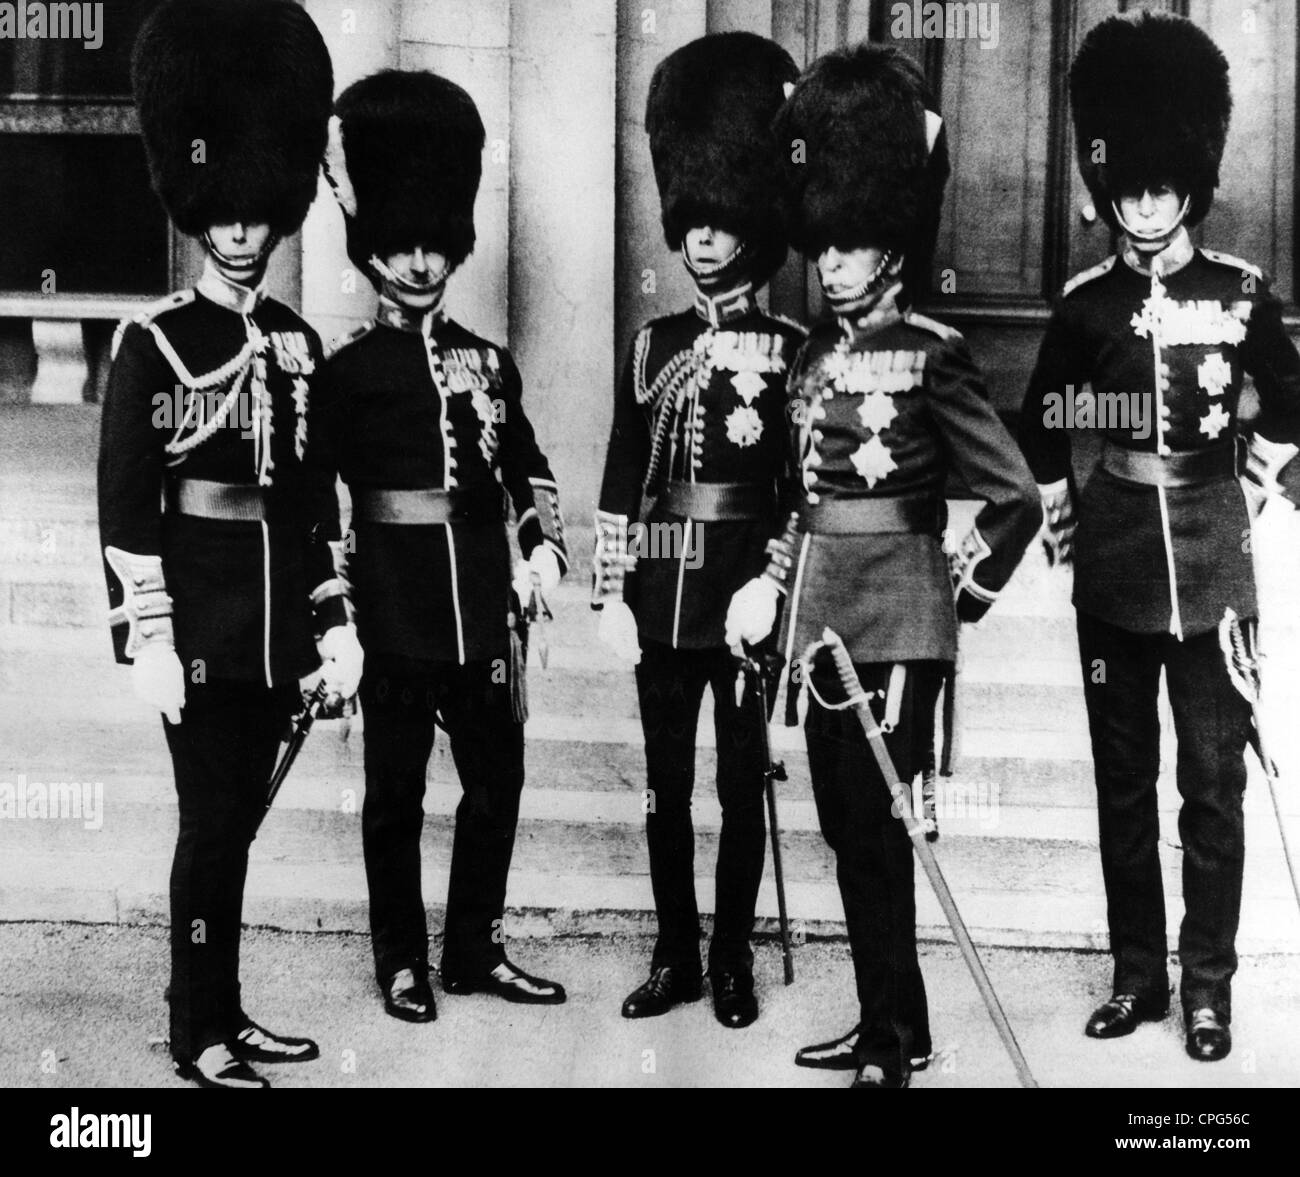 military, Great Britain, guards, the colonels-in-chief of the five regiments of footguards, among them King George V(Grenadier Guards), Eduard Prince of Wales (Welsh Guards) and Prince Albert Duke of York (Scots Guards), London, 1933,King Edward VIII, King George VI, Windsor, Saxe-Coburg-Gotha, Saxe - Coburg - Gotha, uniform, Coldstream Guards, Irish Guards, colonel.in-chief, colonel, infantry, 1930s, 30s, 20th century, historic, historical, people, Additional-Rights-Clearences-Not Available Stock Photo